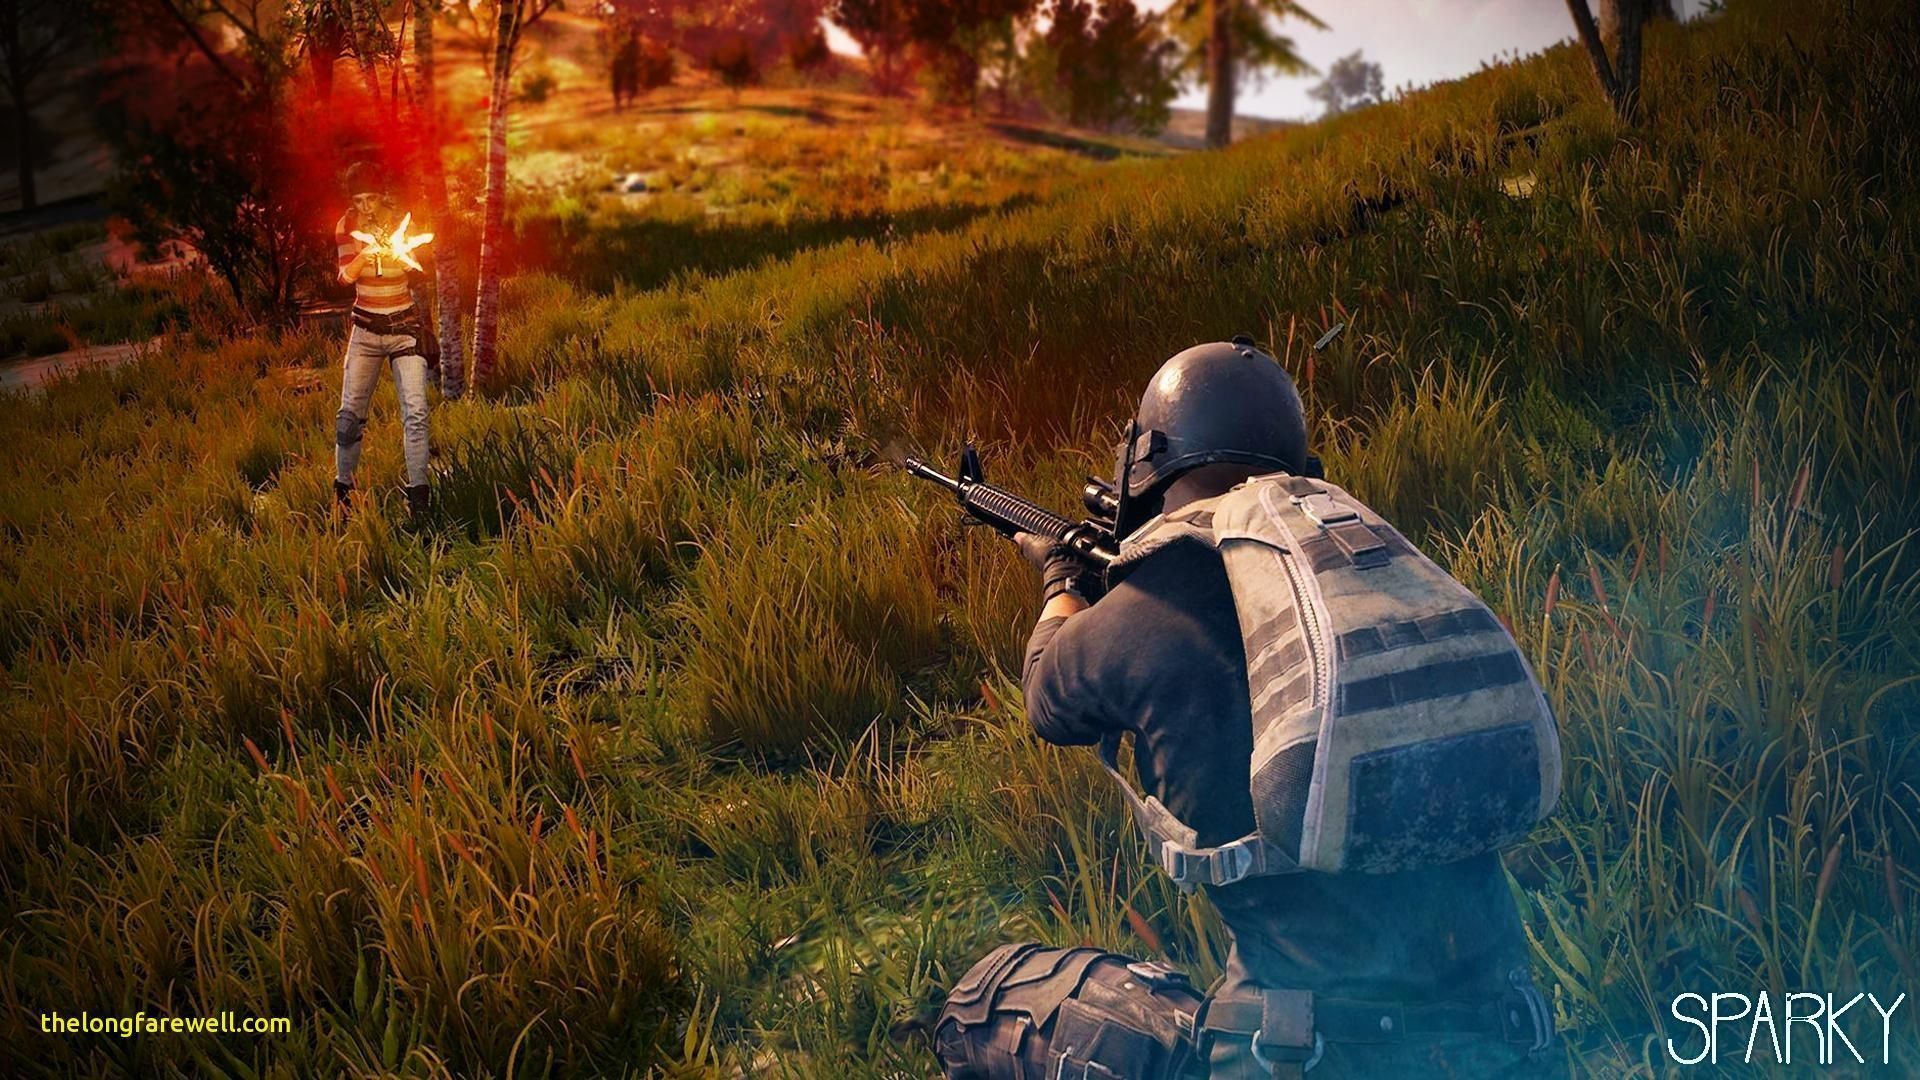 Global Pubg Mobile Apk 2.8 Update Download Link (Play Without Vpn) - Pubg  2.8 Apk